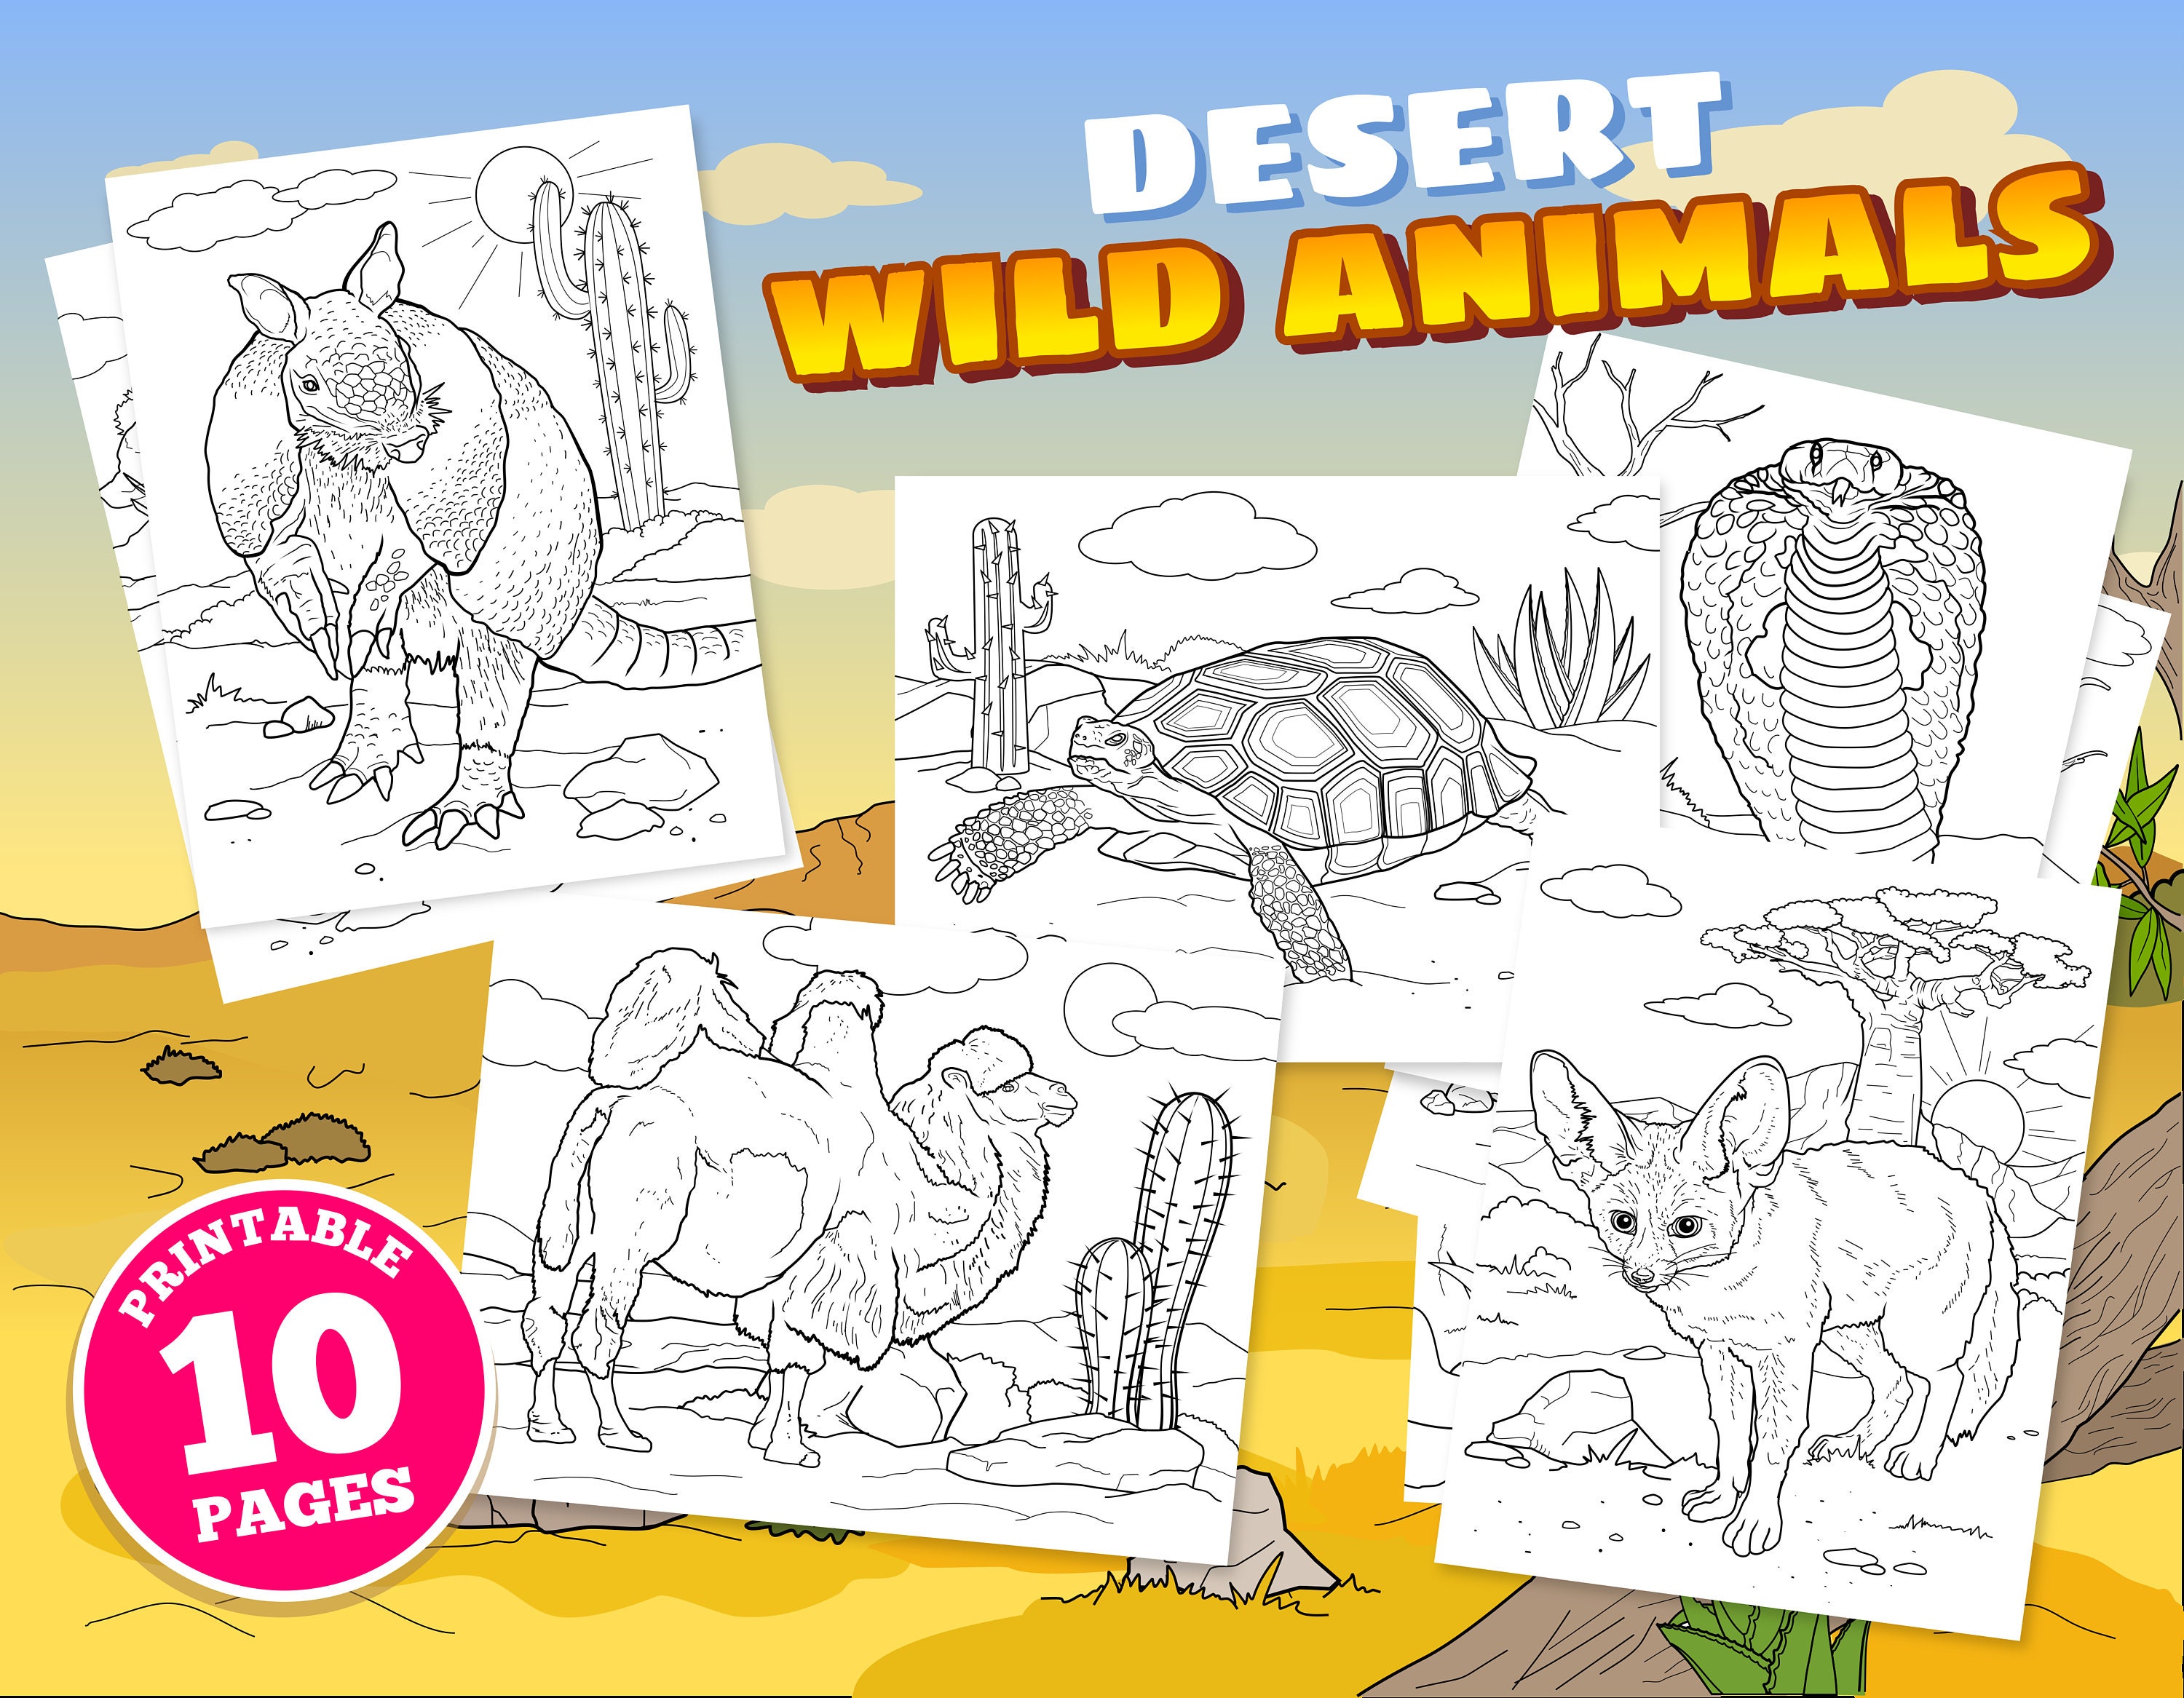 Desert wild animals digital coloring pages snakes printable pdf instant download unique illustrations desert art animals coloring book